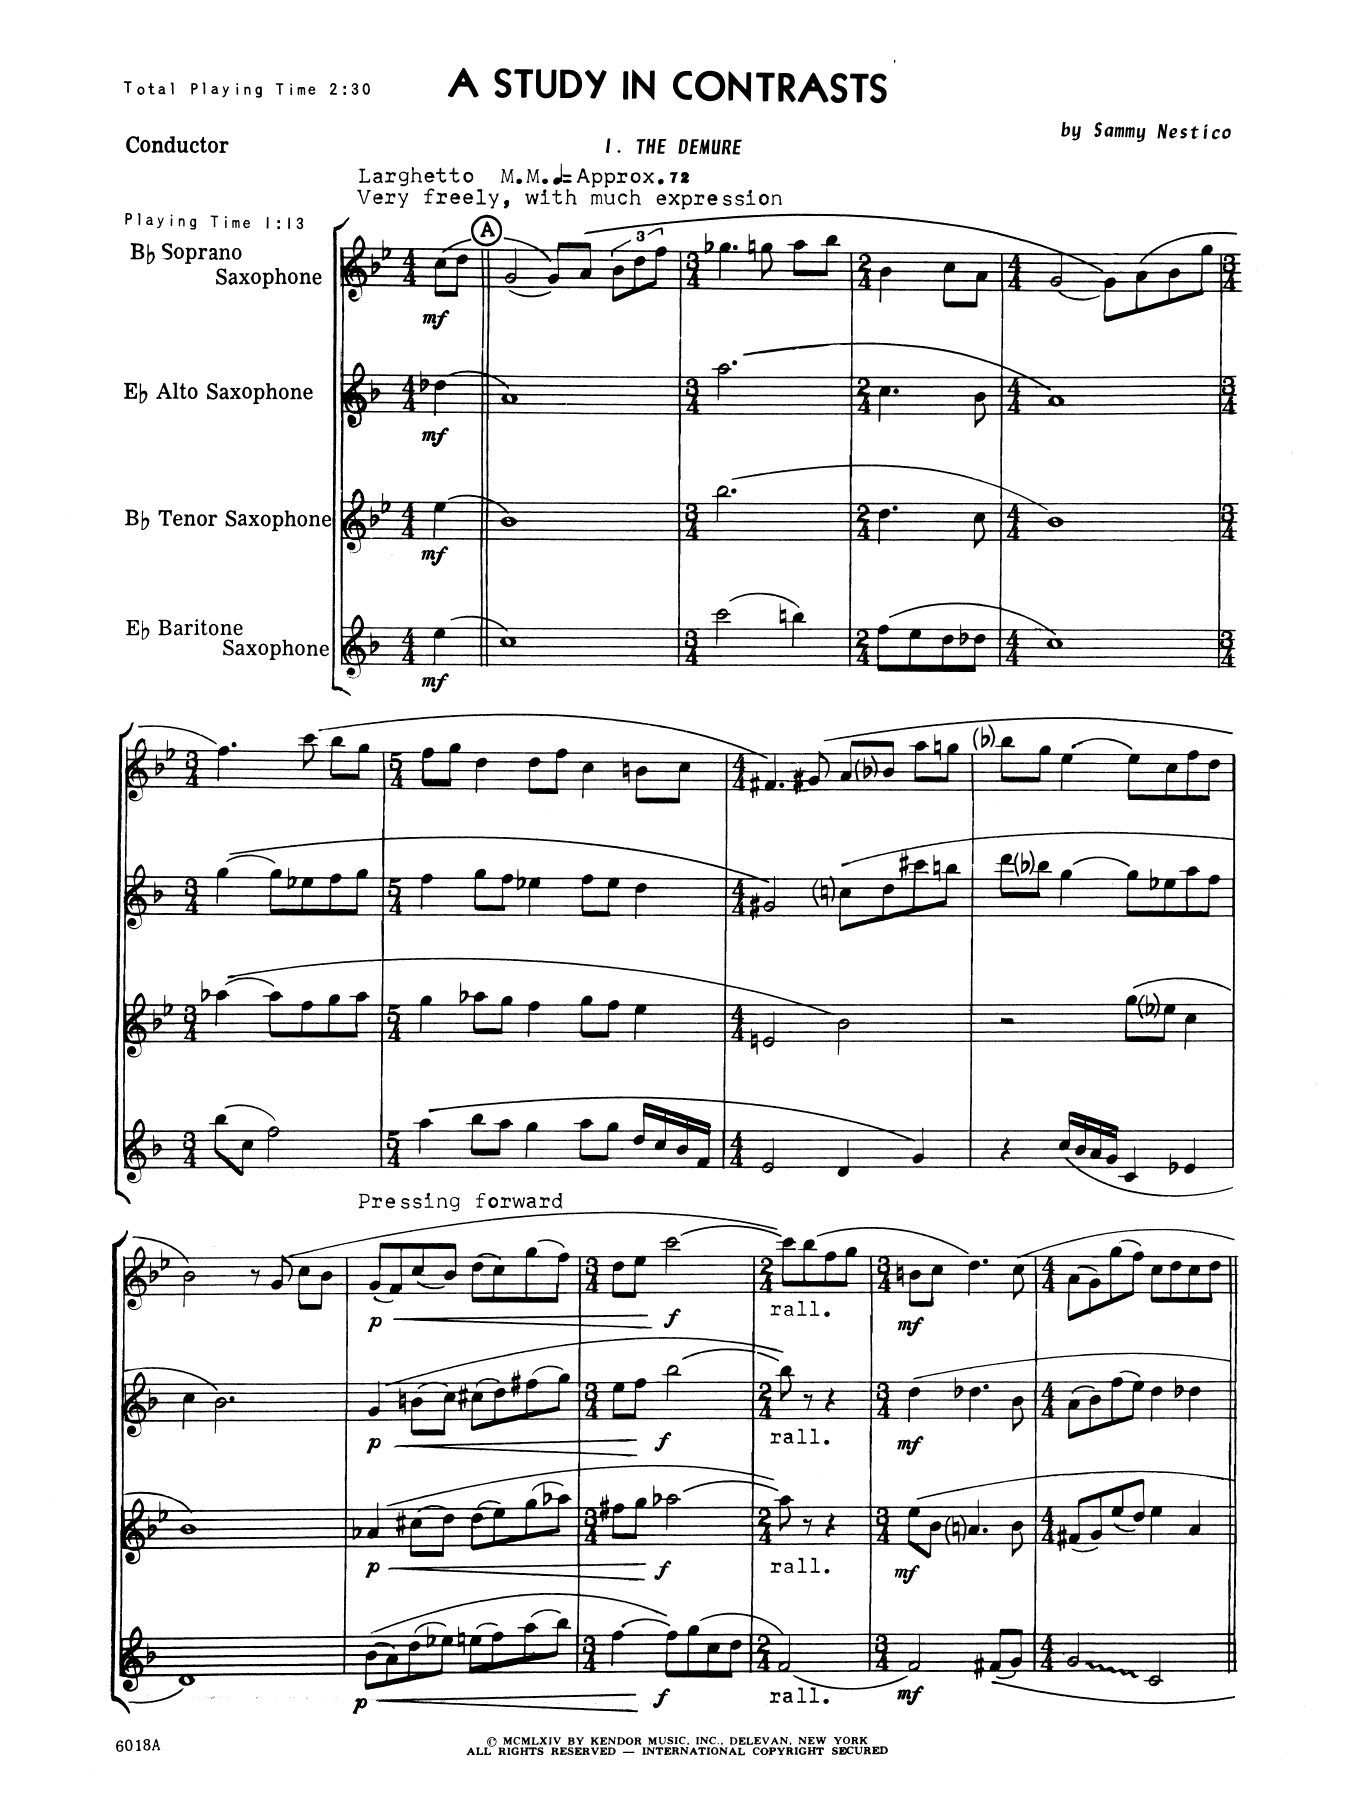 Download Sammy Nestico A Study In Contrasts - Full Score Sheet Music